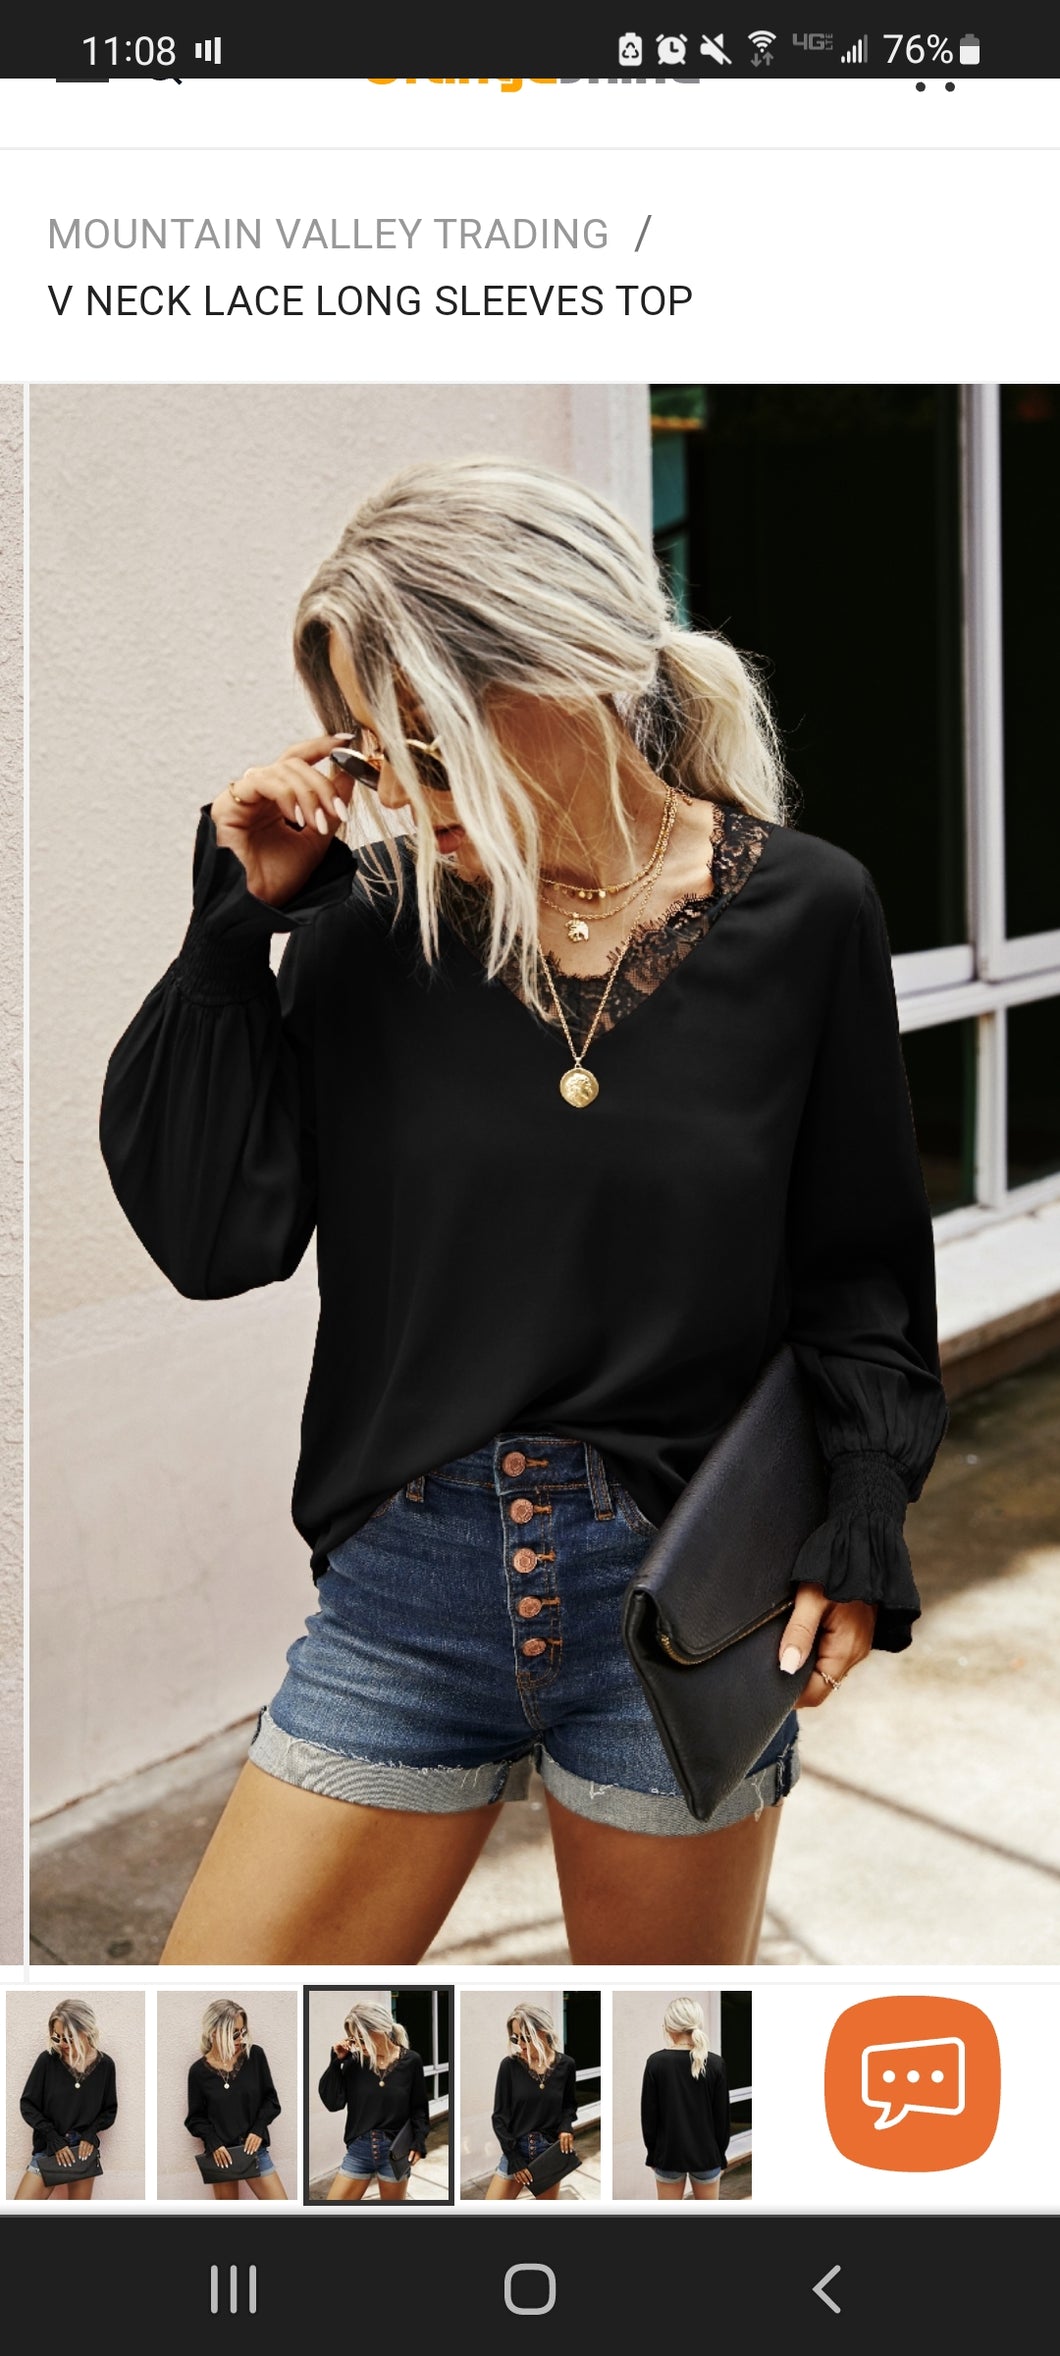 V-NECK LACE LONG SLEEVE TOP